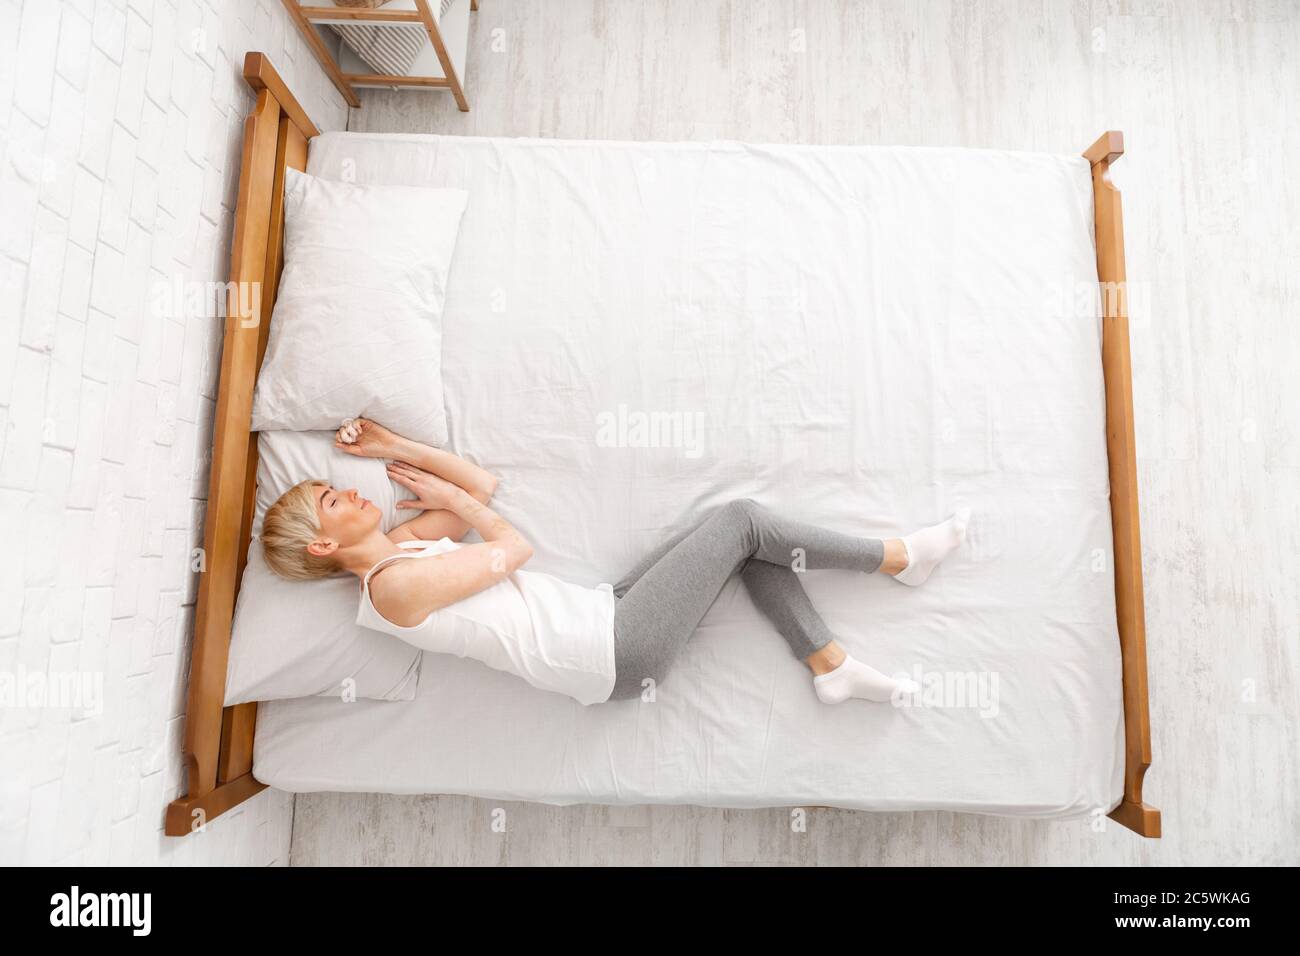 Middle aged lady with vitiligo sleeping in bed, top view Stock Photo